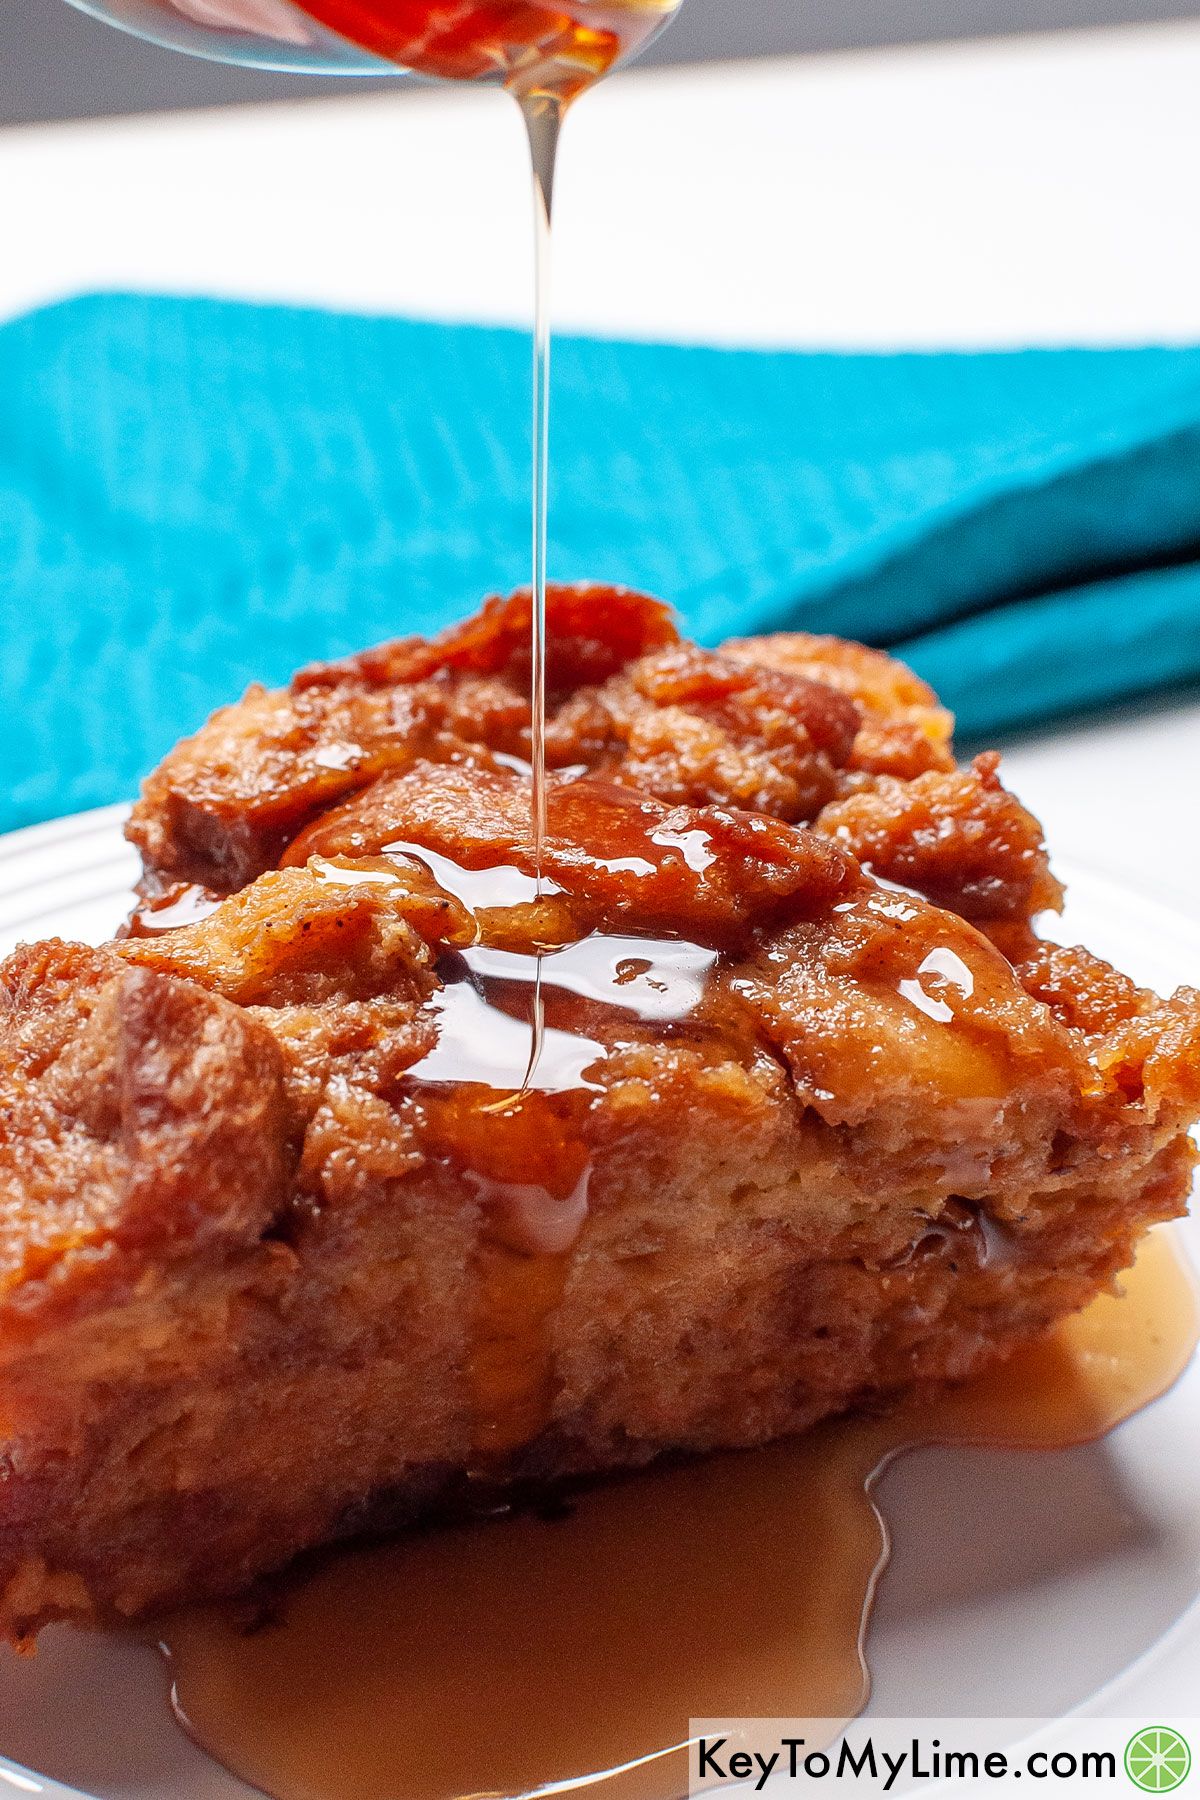 Pour syrup into a serving of Crockpot French toast casserole.